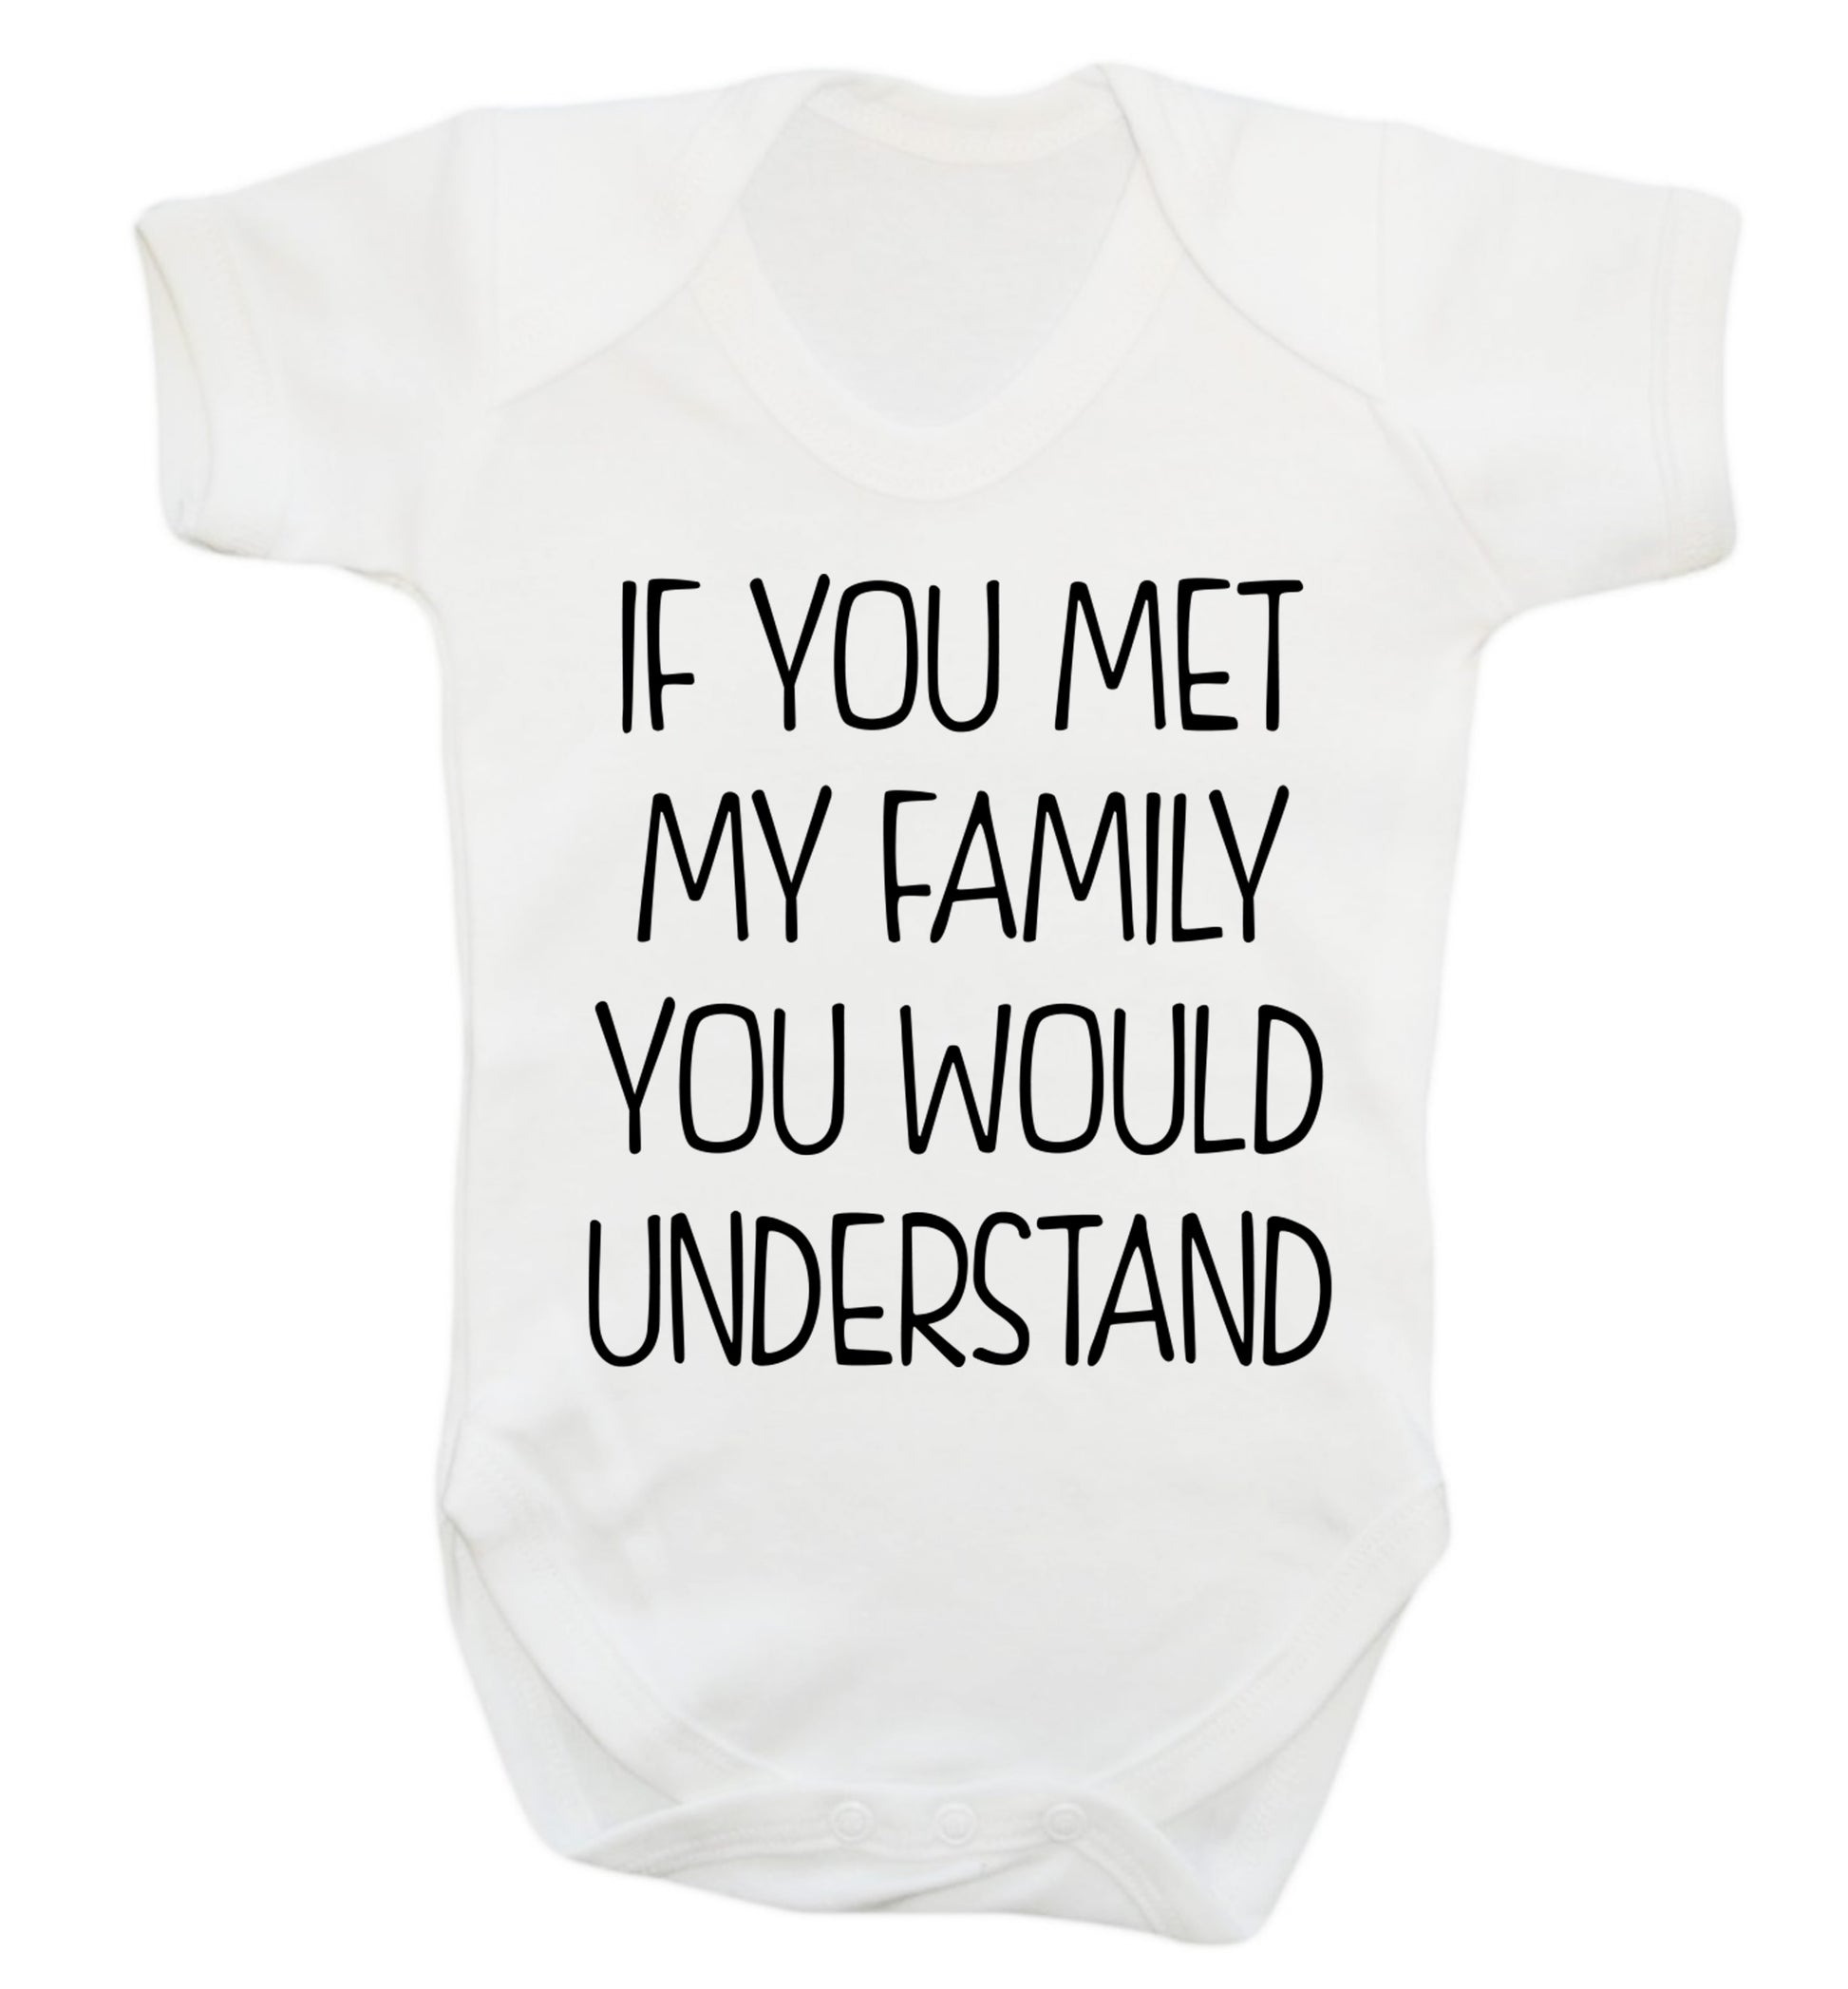 If you met my family you would understand Baby Vest white 18-24 months